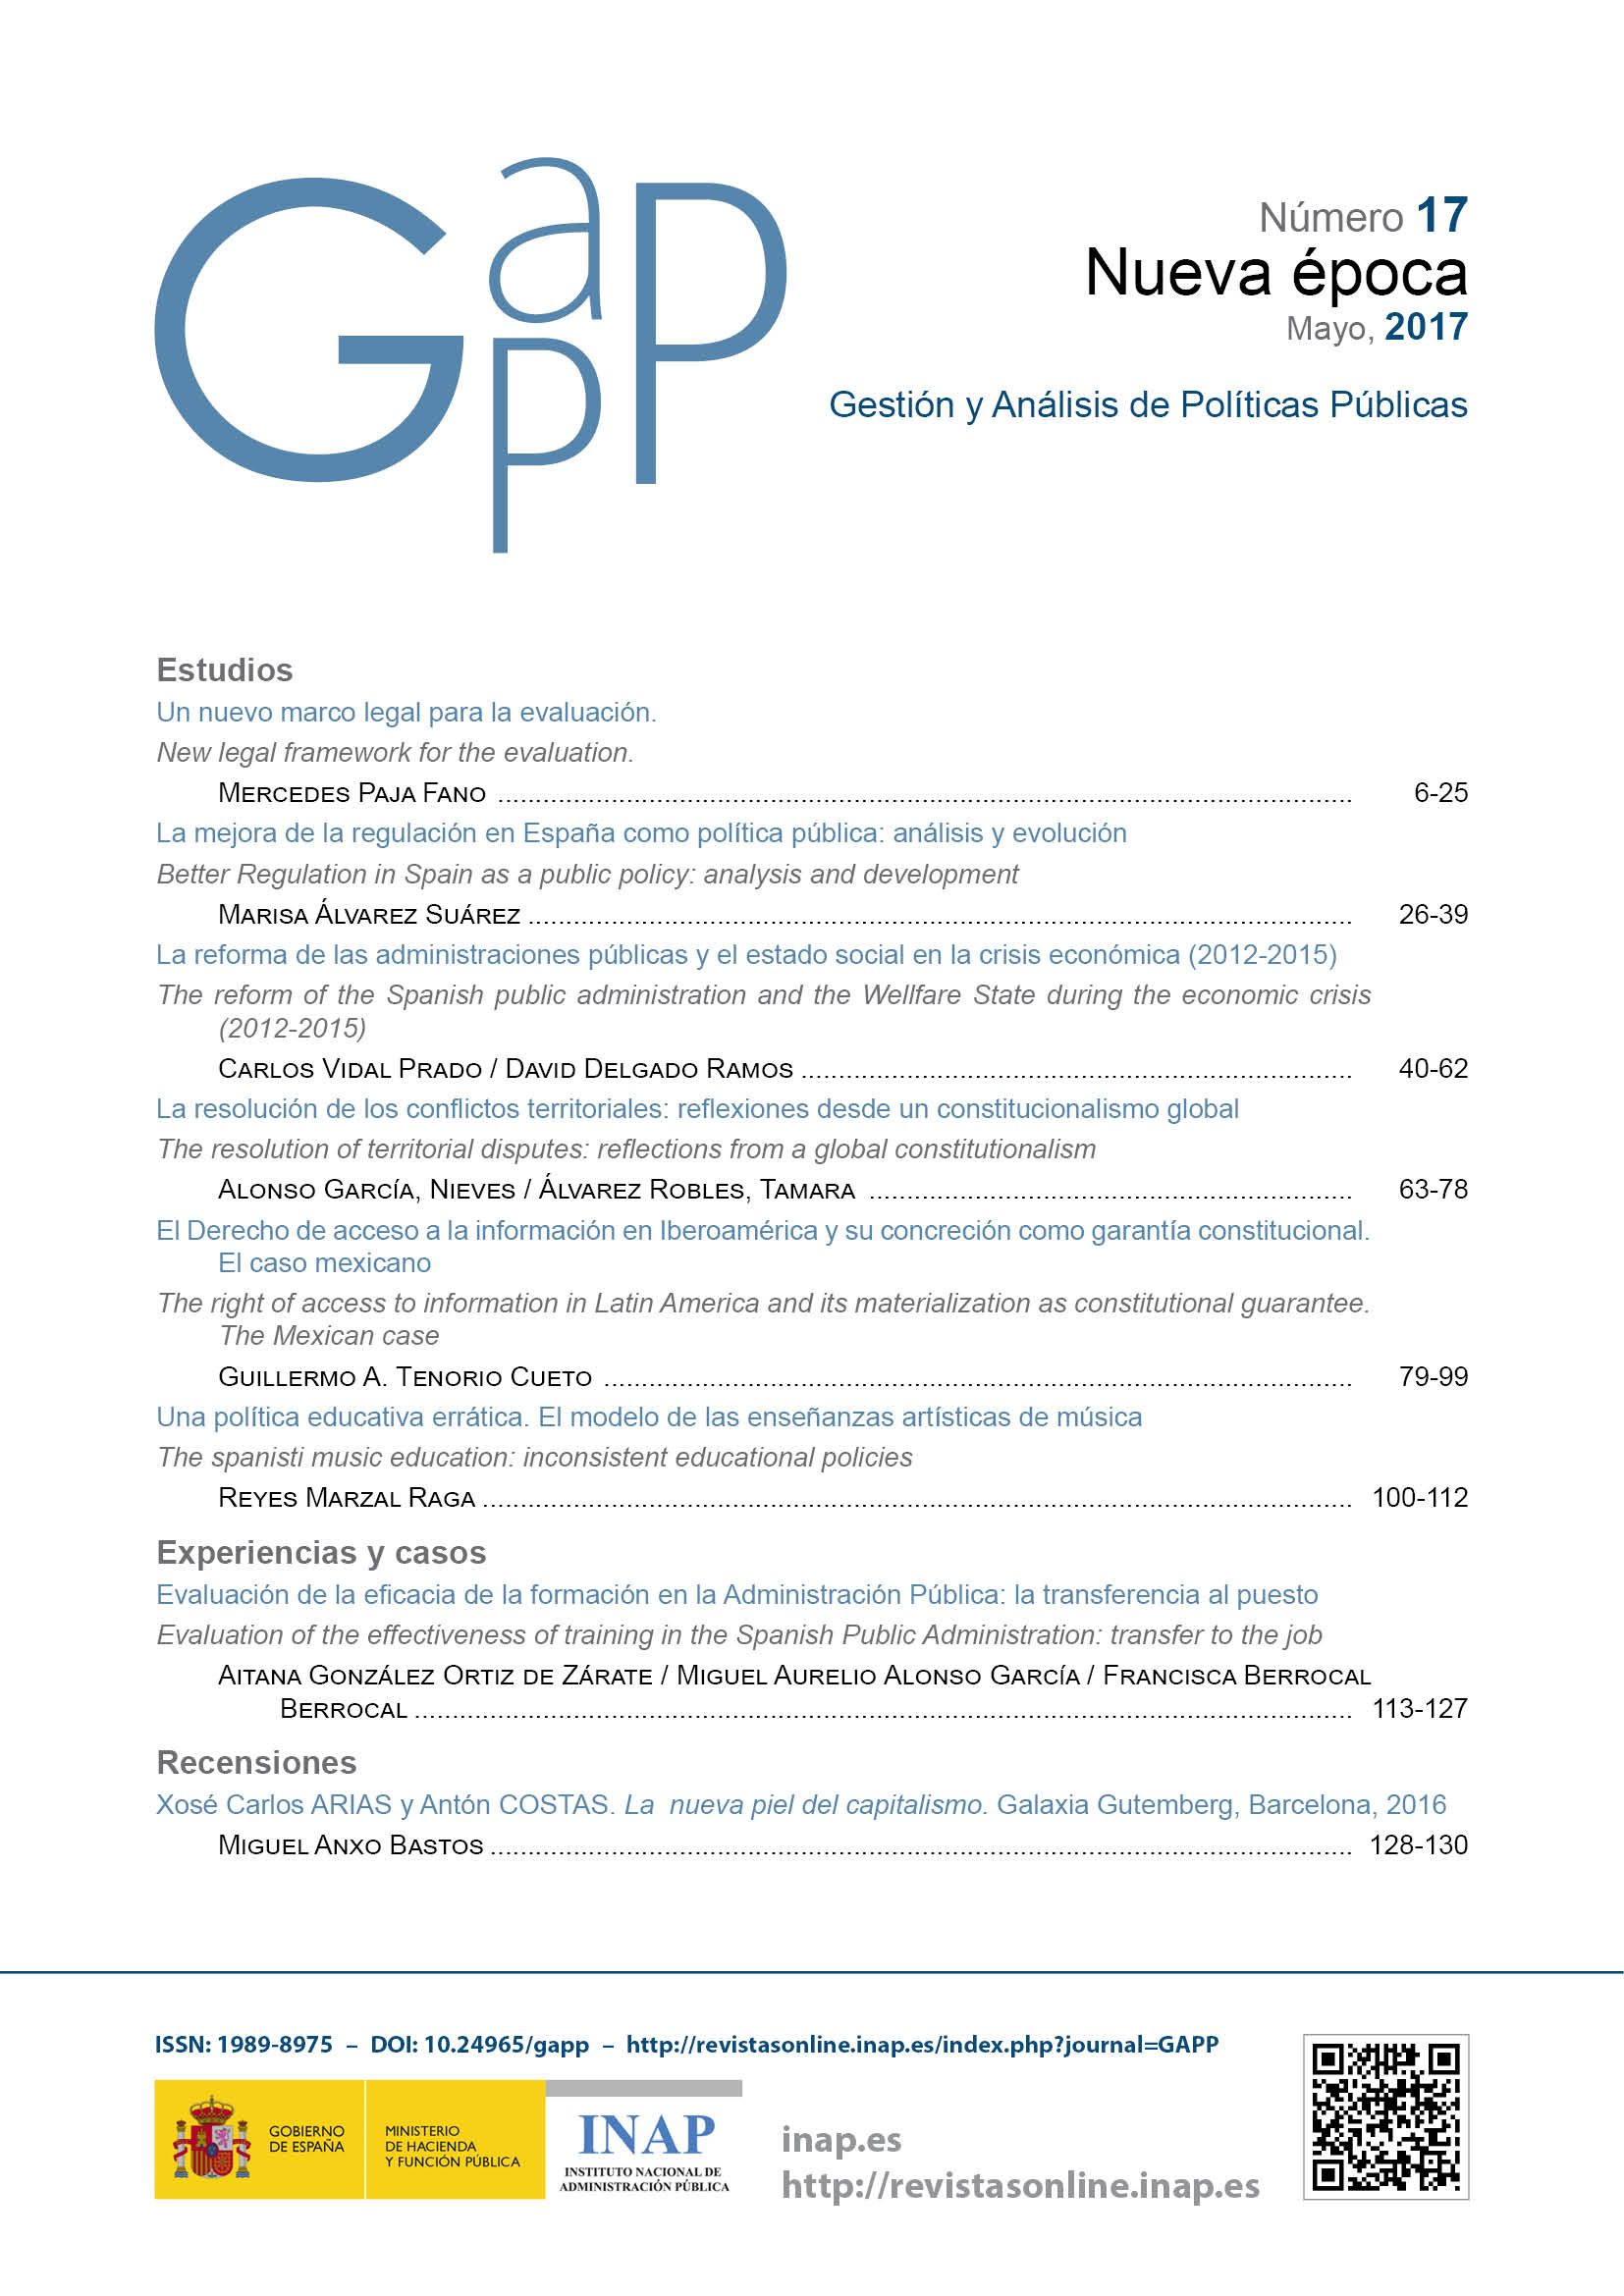 Cover image of current journal